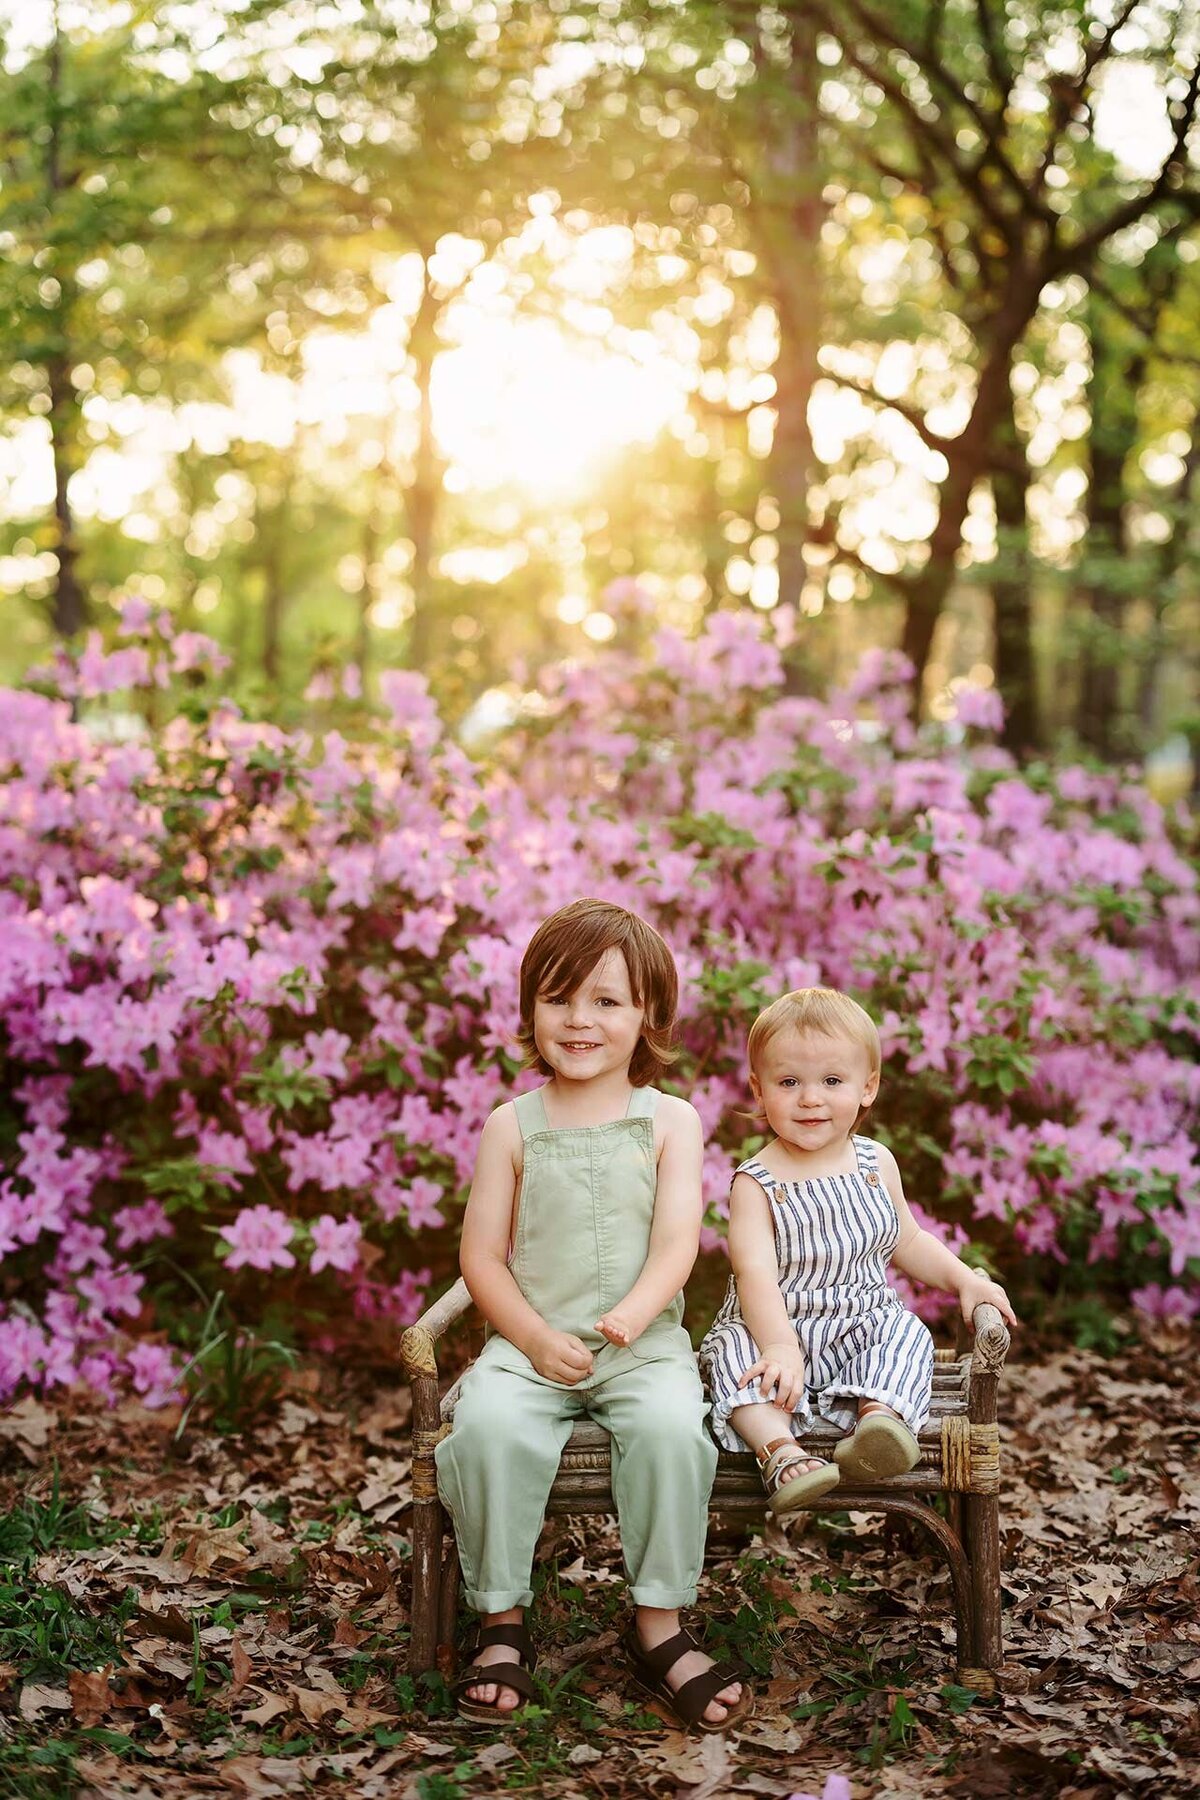 memphis family photography by jen howell 5